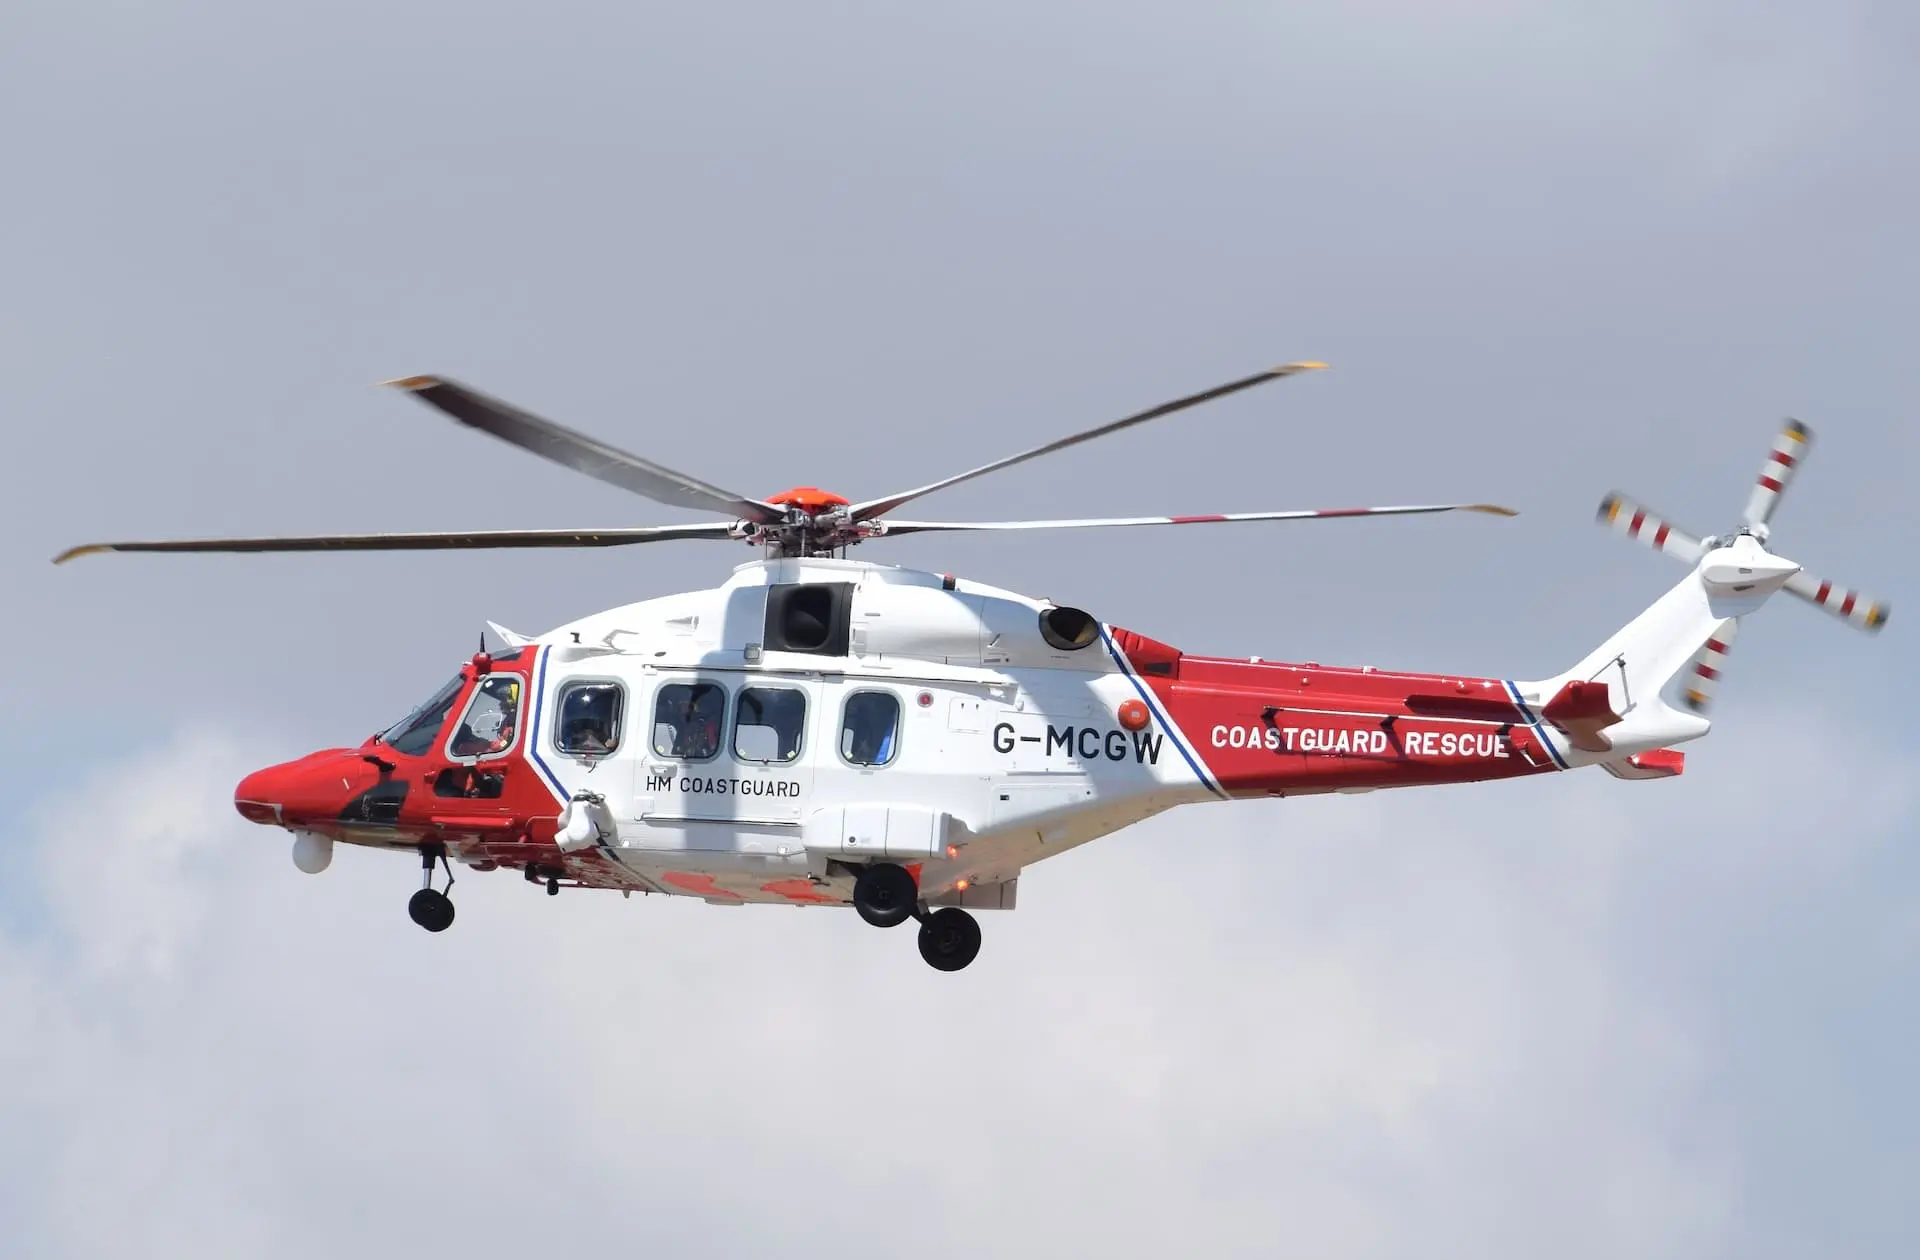 AgustaWestland AW189 helicopter (G-MCGW) of the UK Coastguard arrives at the 2018 Royal International Air Tattoo, RAF Fairford, England. Information: In 2013, Bristow Helicopters Limited won the UK Government national contract to deliver search and rescue operations on behalf of the Maritime and Coastguard Agency (MCA).

Bristow Helicopters took over the helicopter civilian Search & Rescue responsibility from the Royal Air Force and Royal Navy in a phased approach throughout 2015 and 2016. Bristow now operates from 10 coastguard helicopter bases around the UK on behalf of Her Majesty’s Coastguard to respond to all SAR incidents for the whole of the UK. 